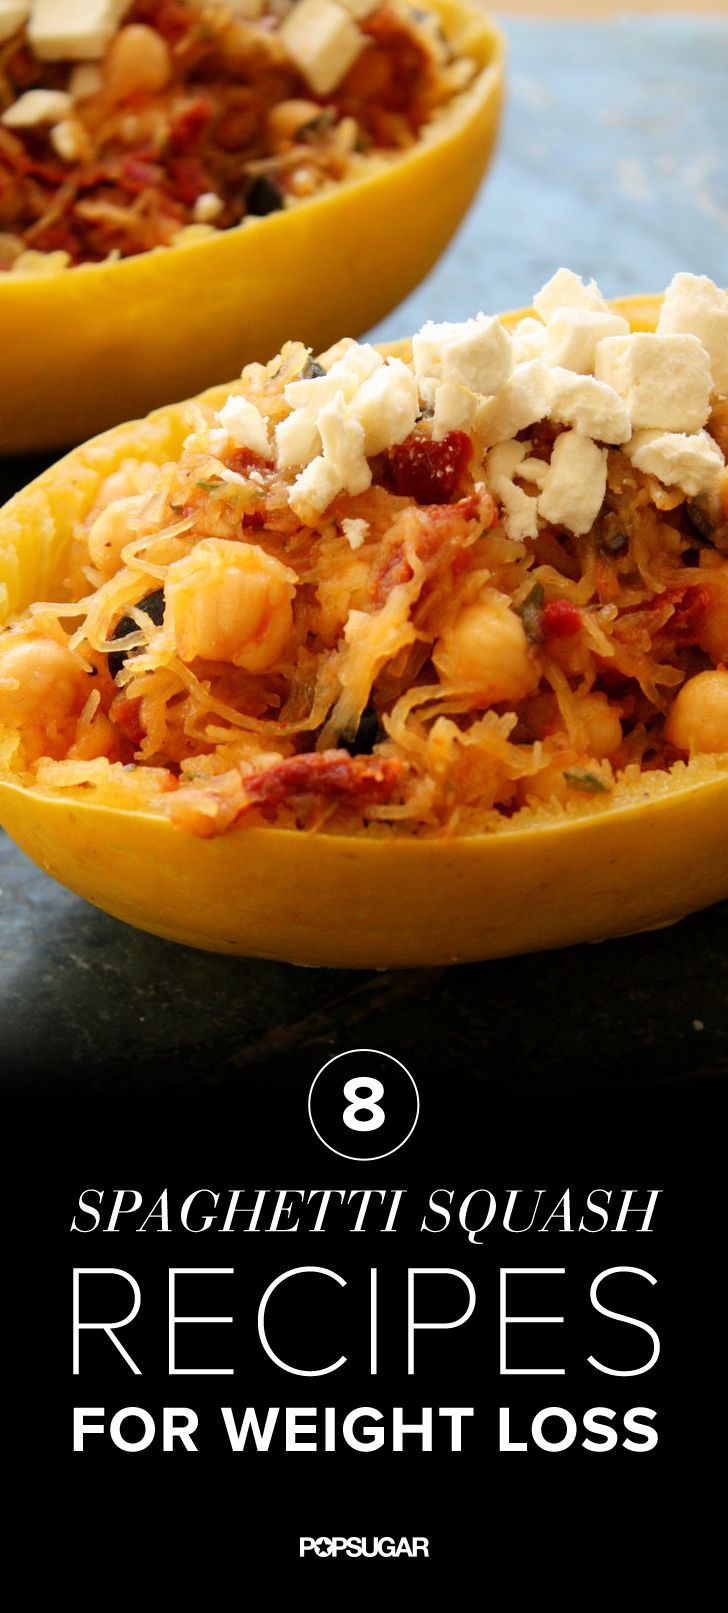 Creative topping combinations will help you serve up spaghetti squash as a light dinner or hearty side dish!